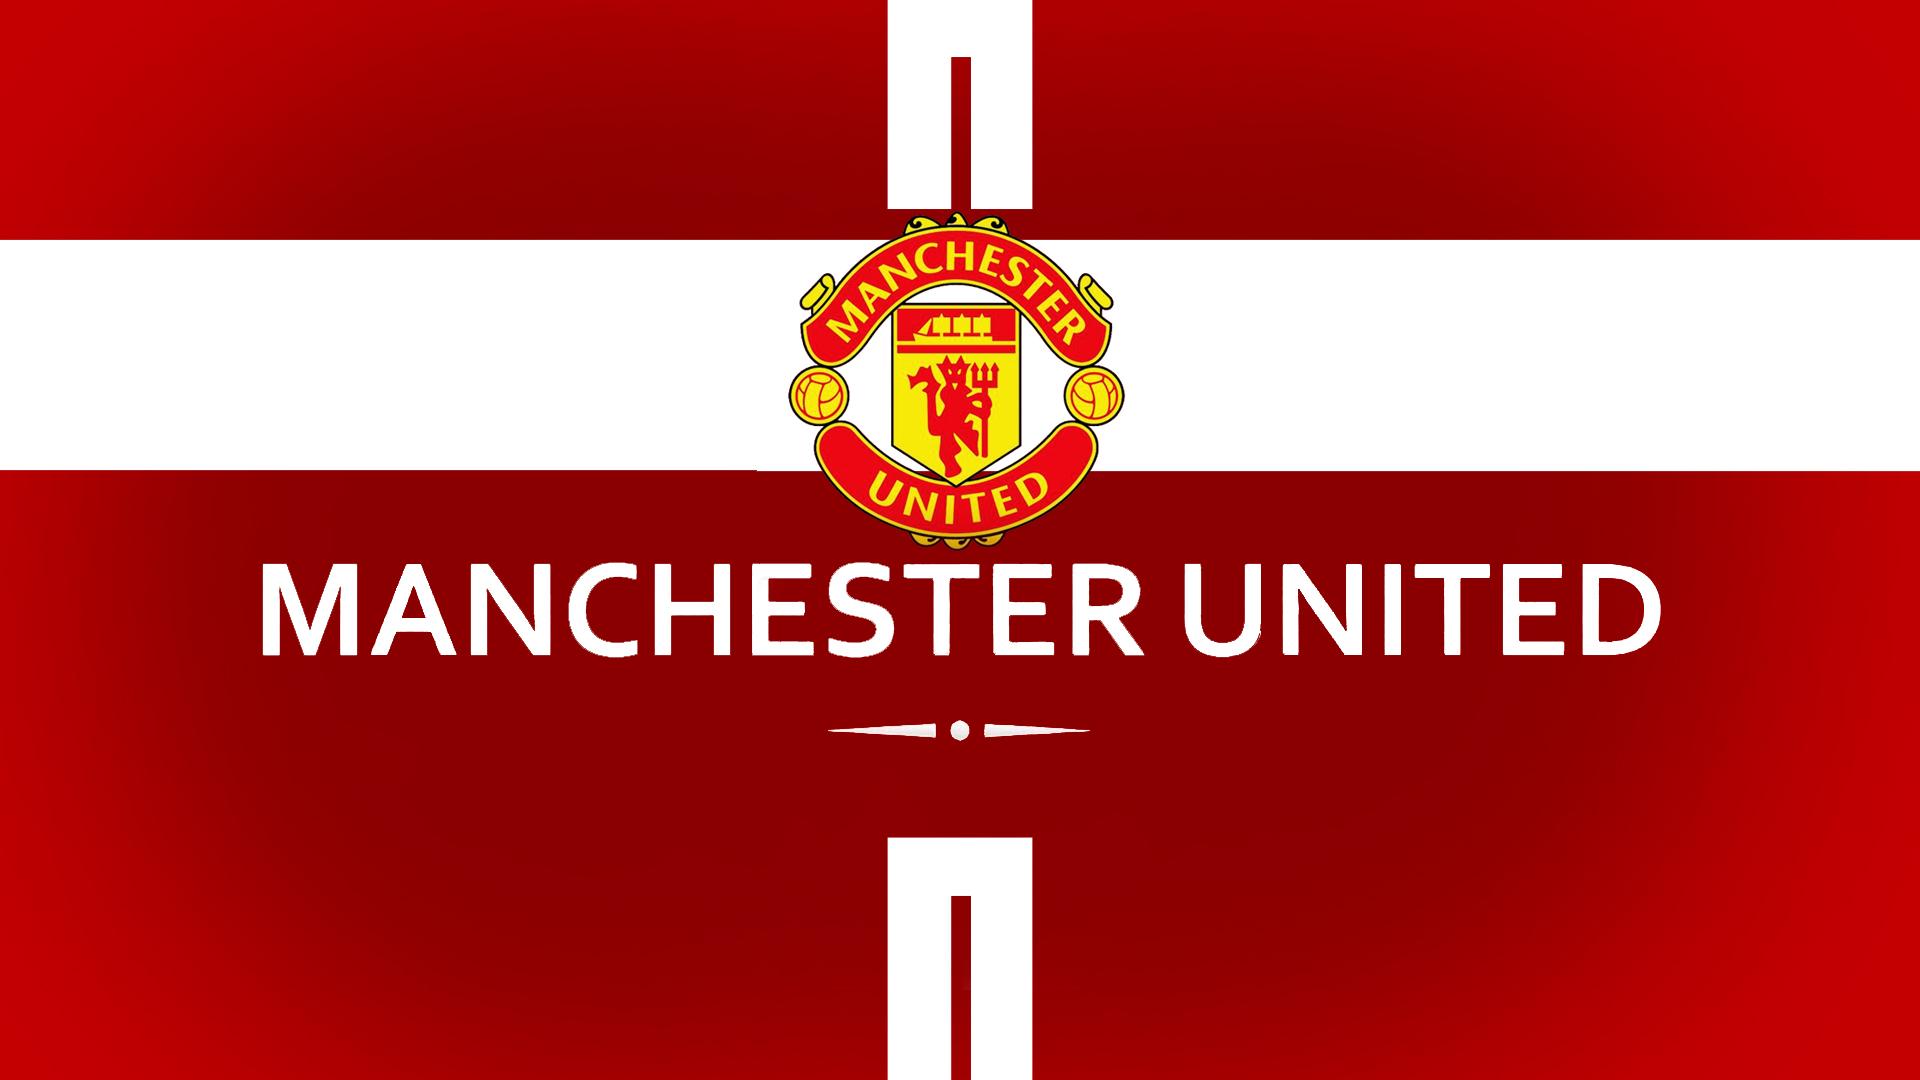 Manchester United 2019 Wallpapers Wallpaper Cave - manchester united new logo 2019 hd